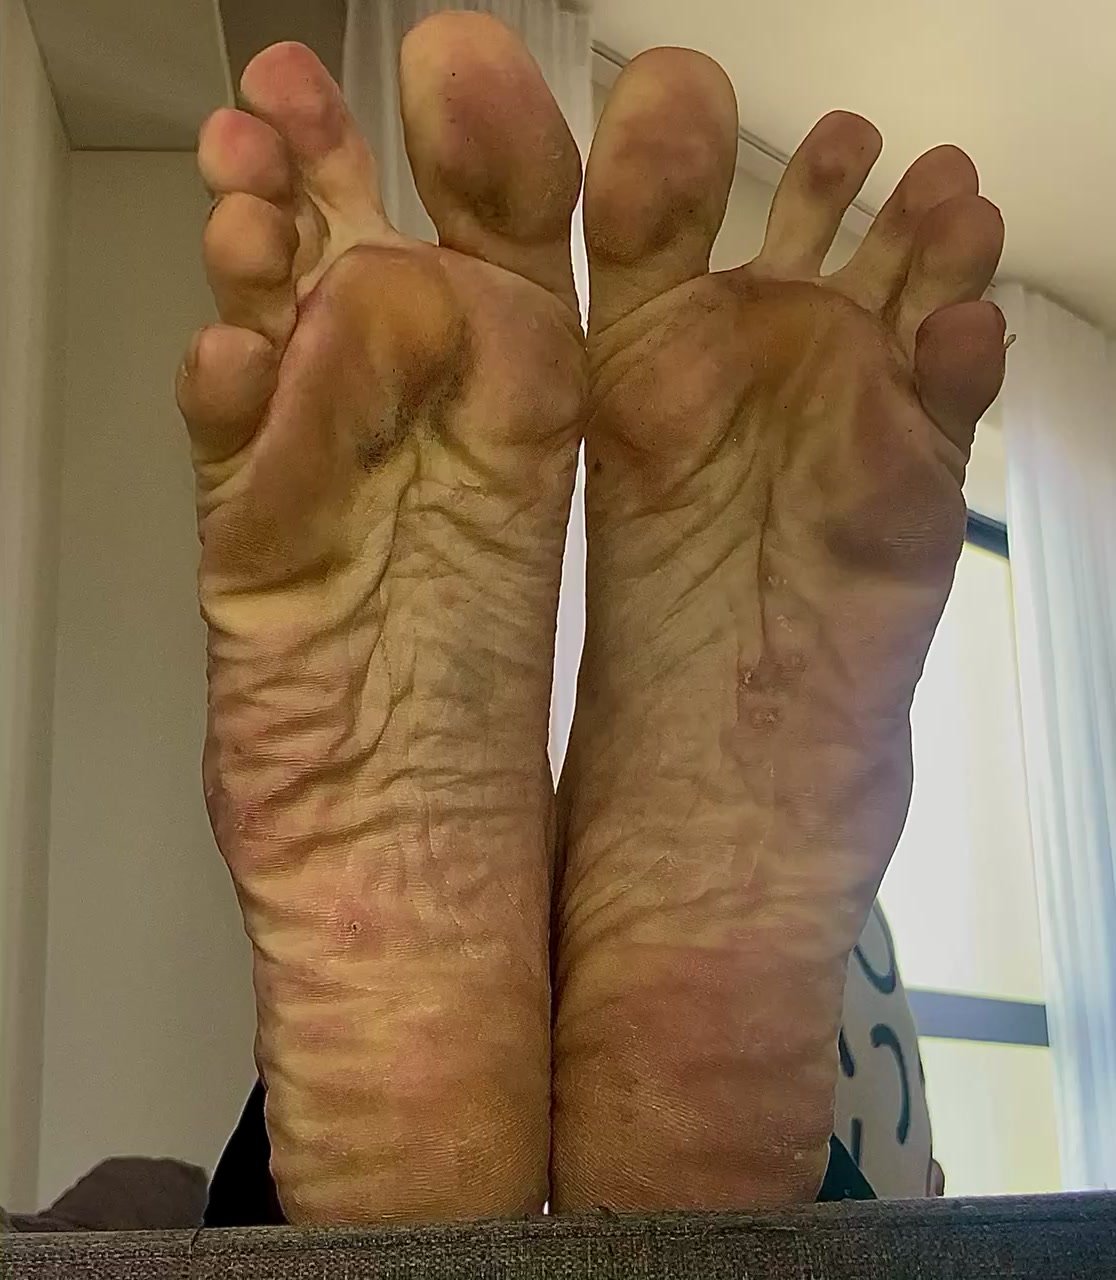 My smelly yellow feet soles